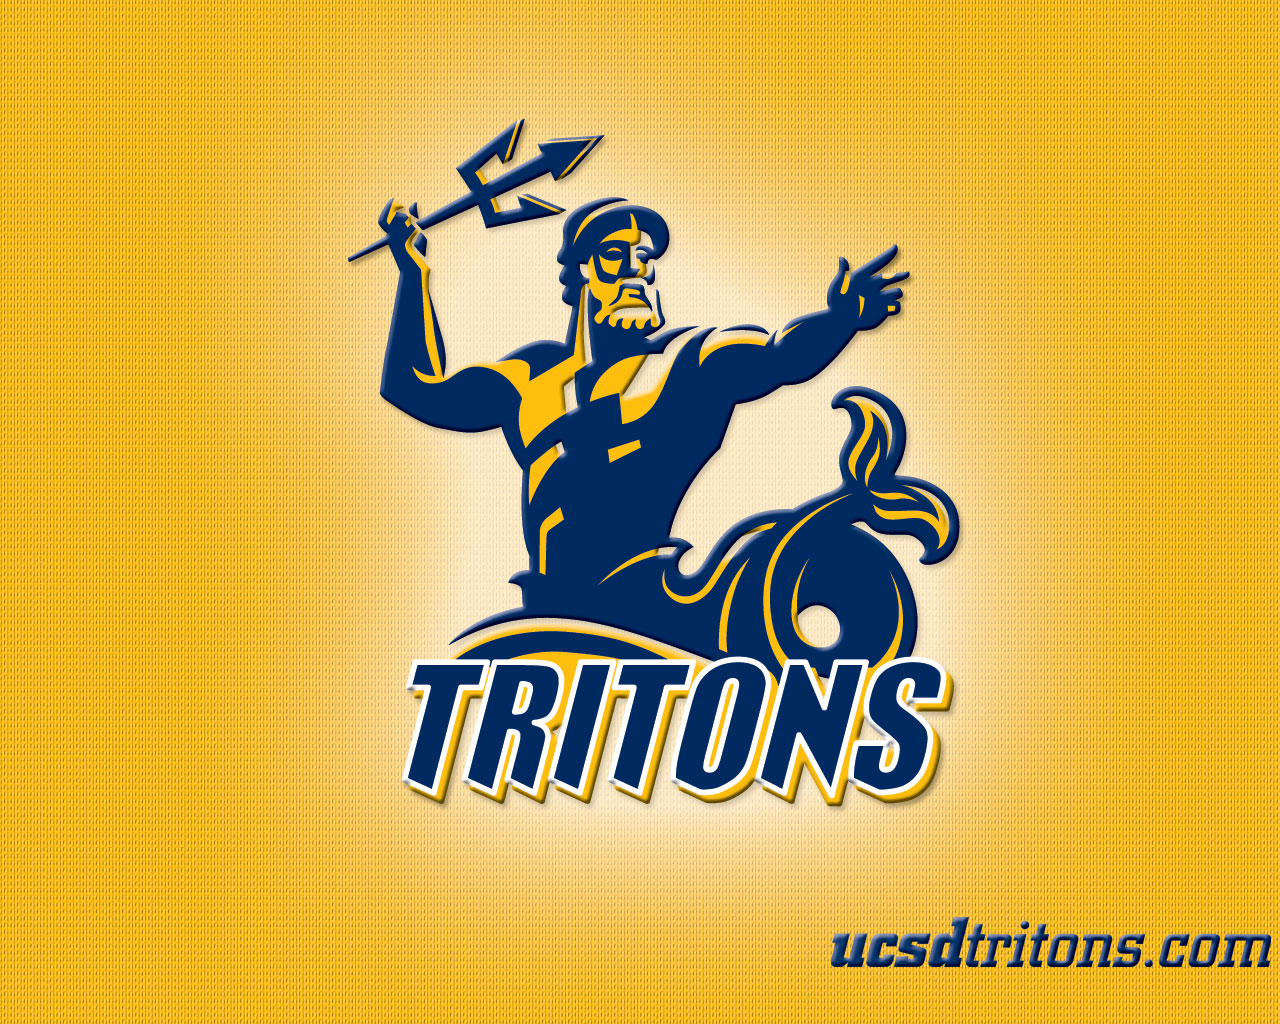 Wallpaper Ucsdtritons Official Web Site Of Uc San Diego